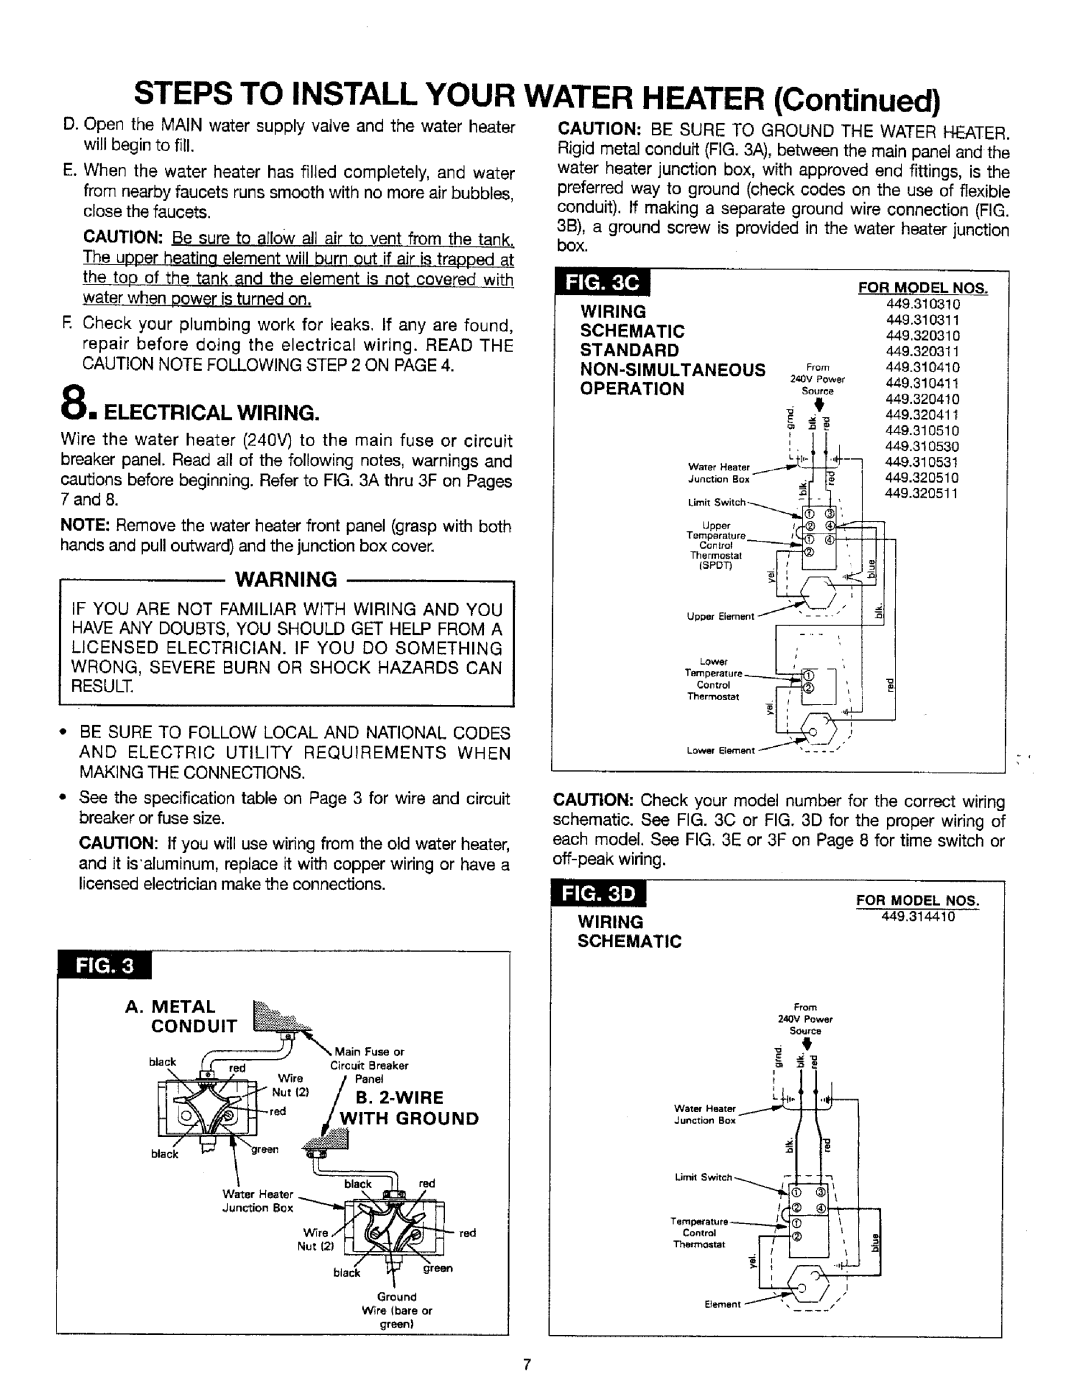 Sears 449.310311 Electrical Wiring, l.l .=, Schematic, Standard, Non-Simultaneous, Operation, A. Metal Conduit, Wi HGROUND 